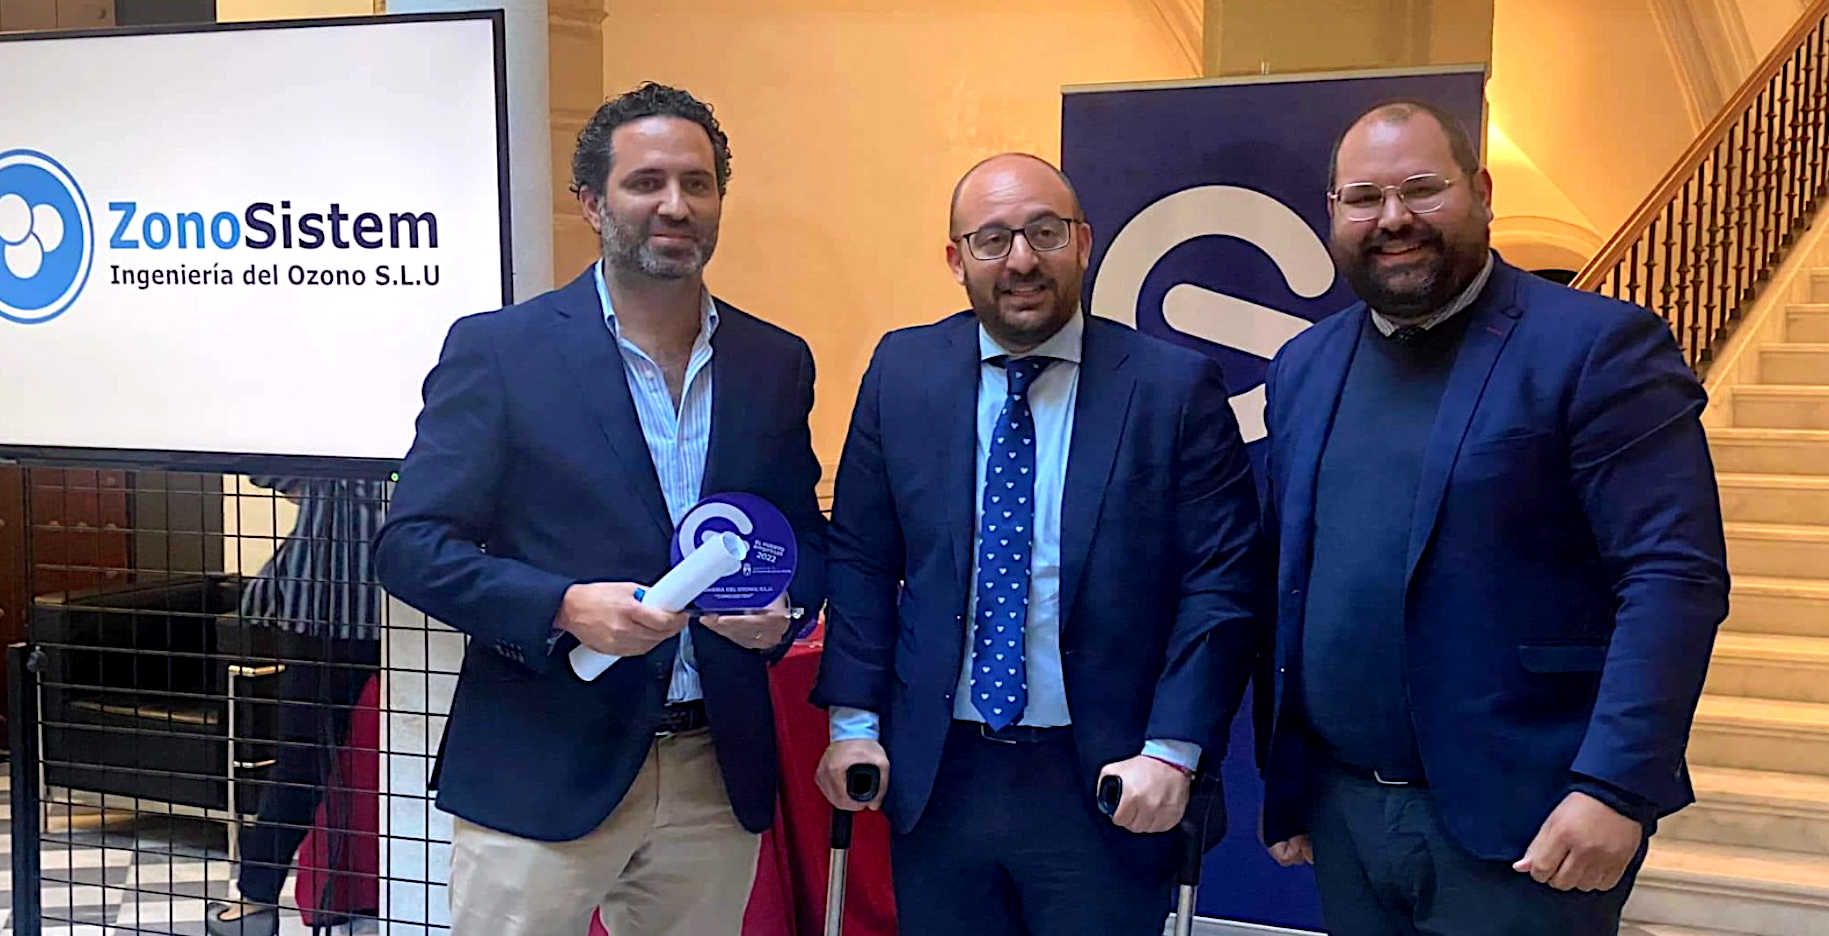 ZonoSistem awarded in the first edition of the 'El Puerto Empresas' awards